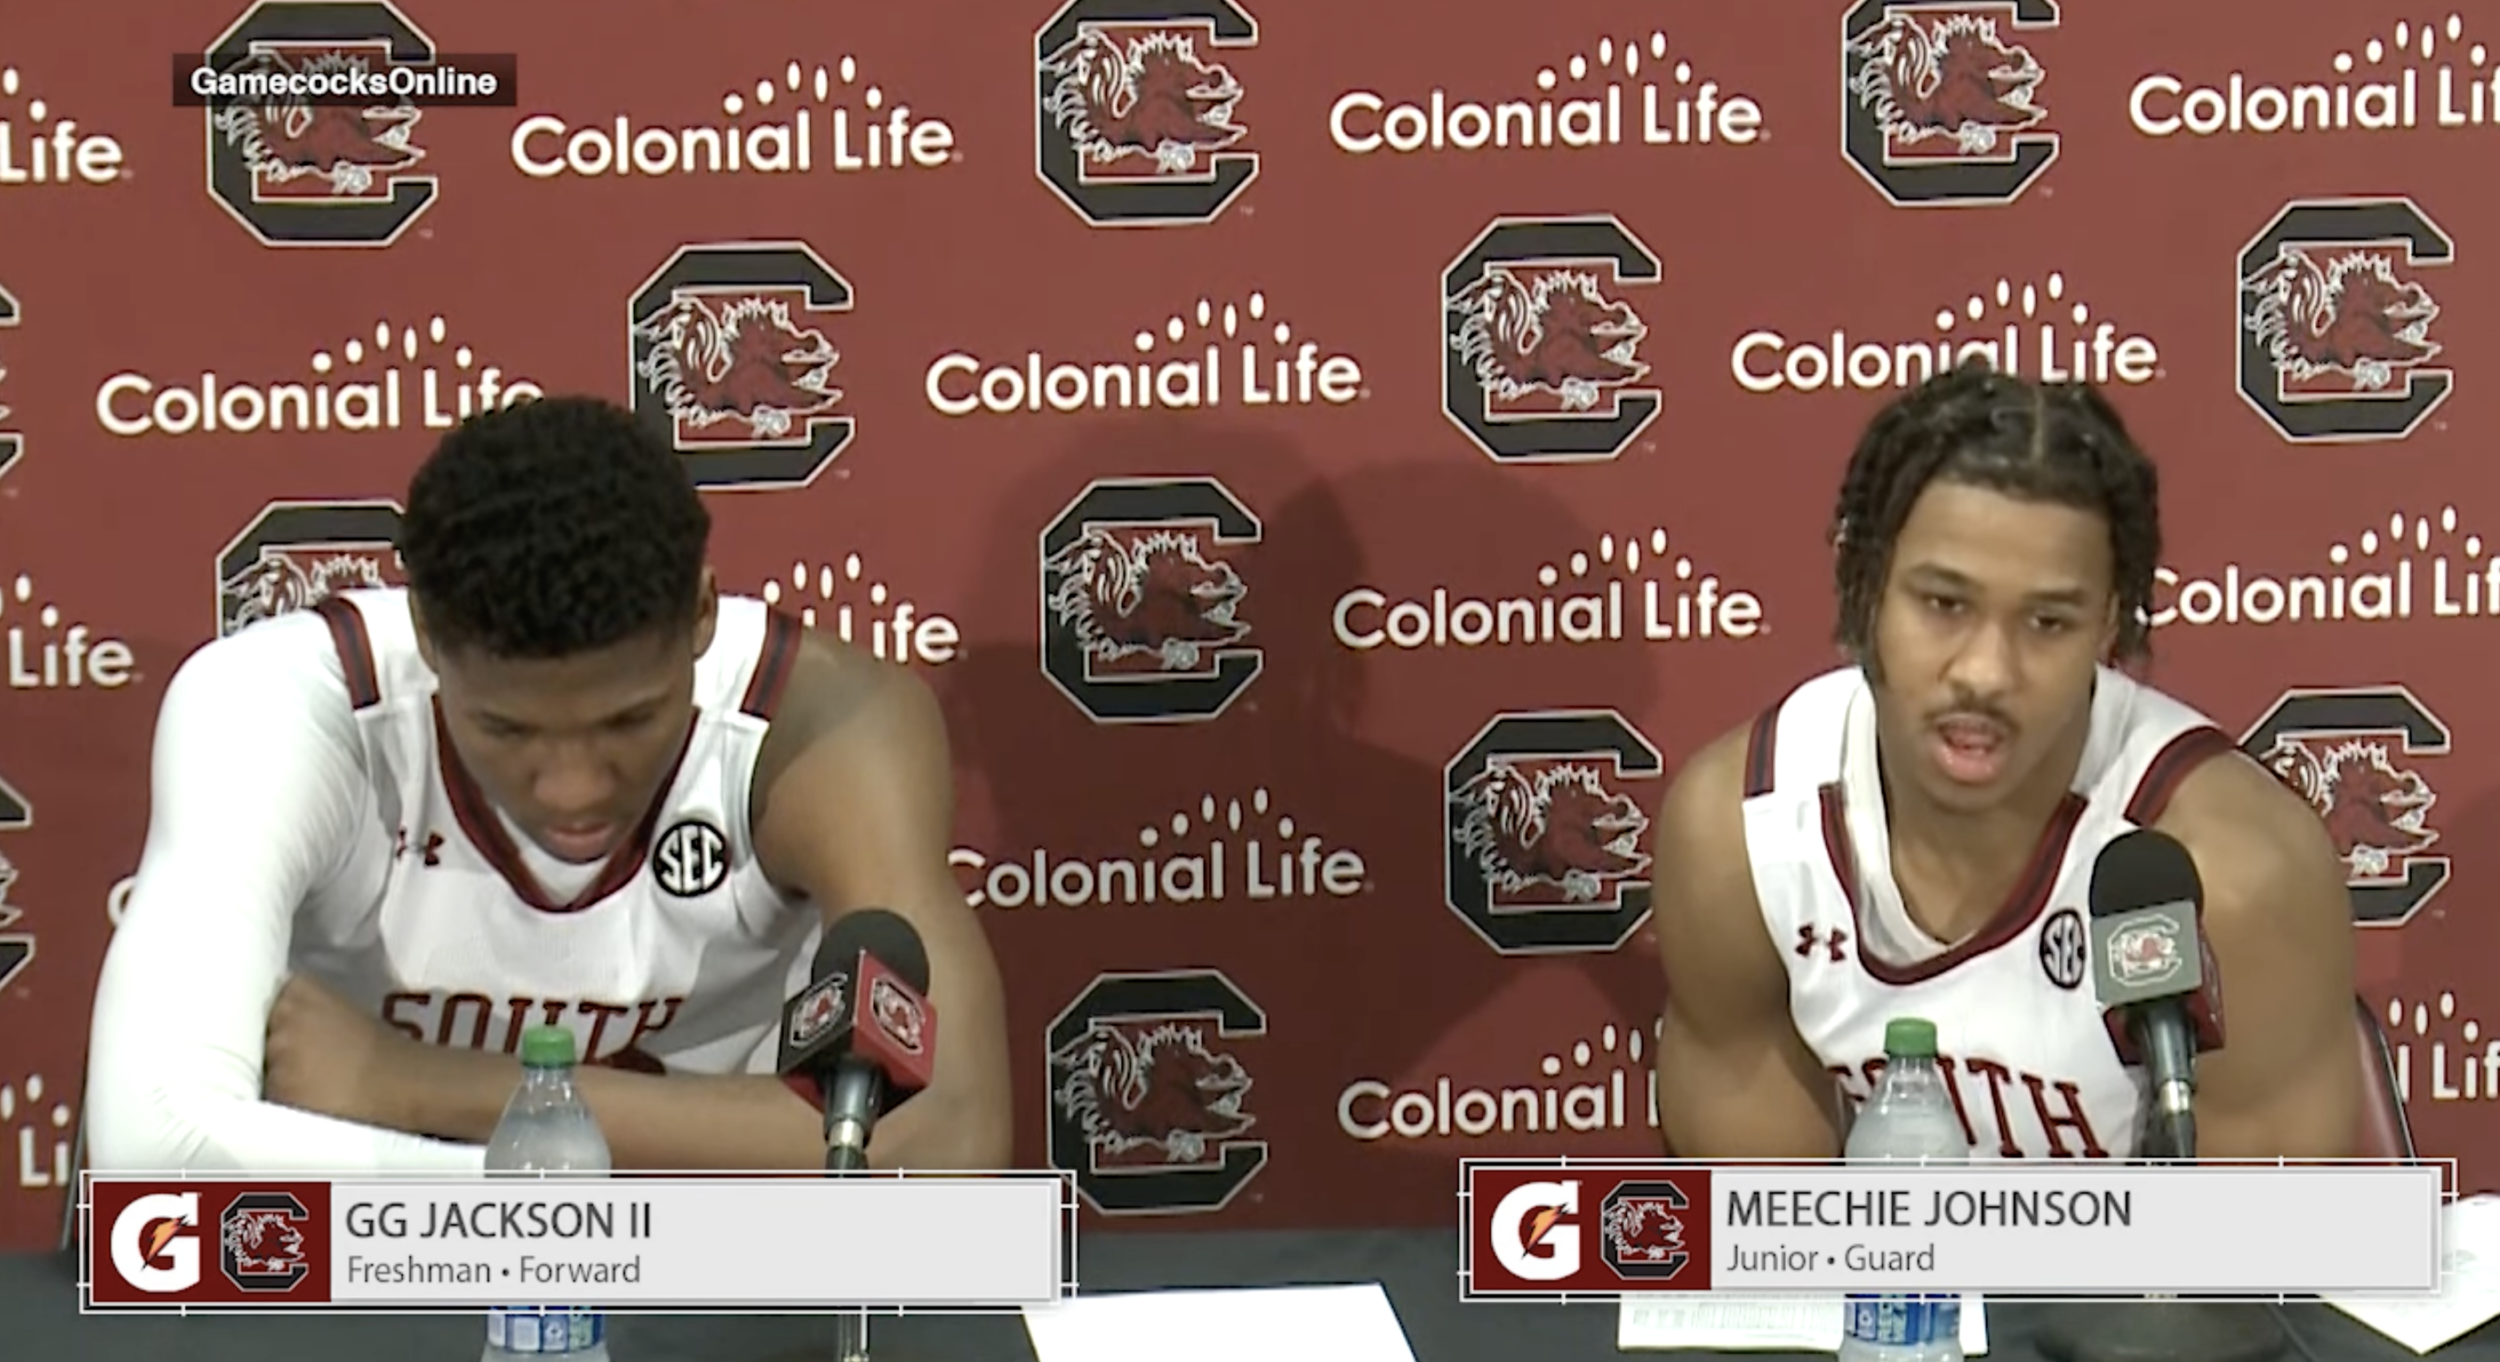 PostGame News Conference: (Miss St) - GG Jackson ll & Meechie Johnson